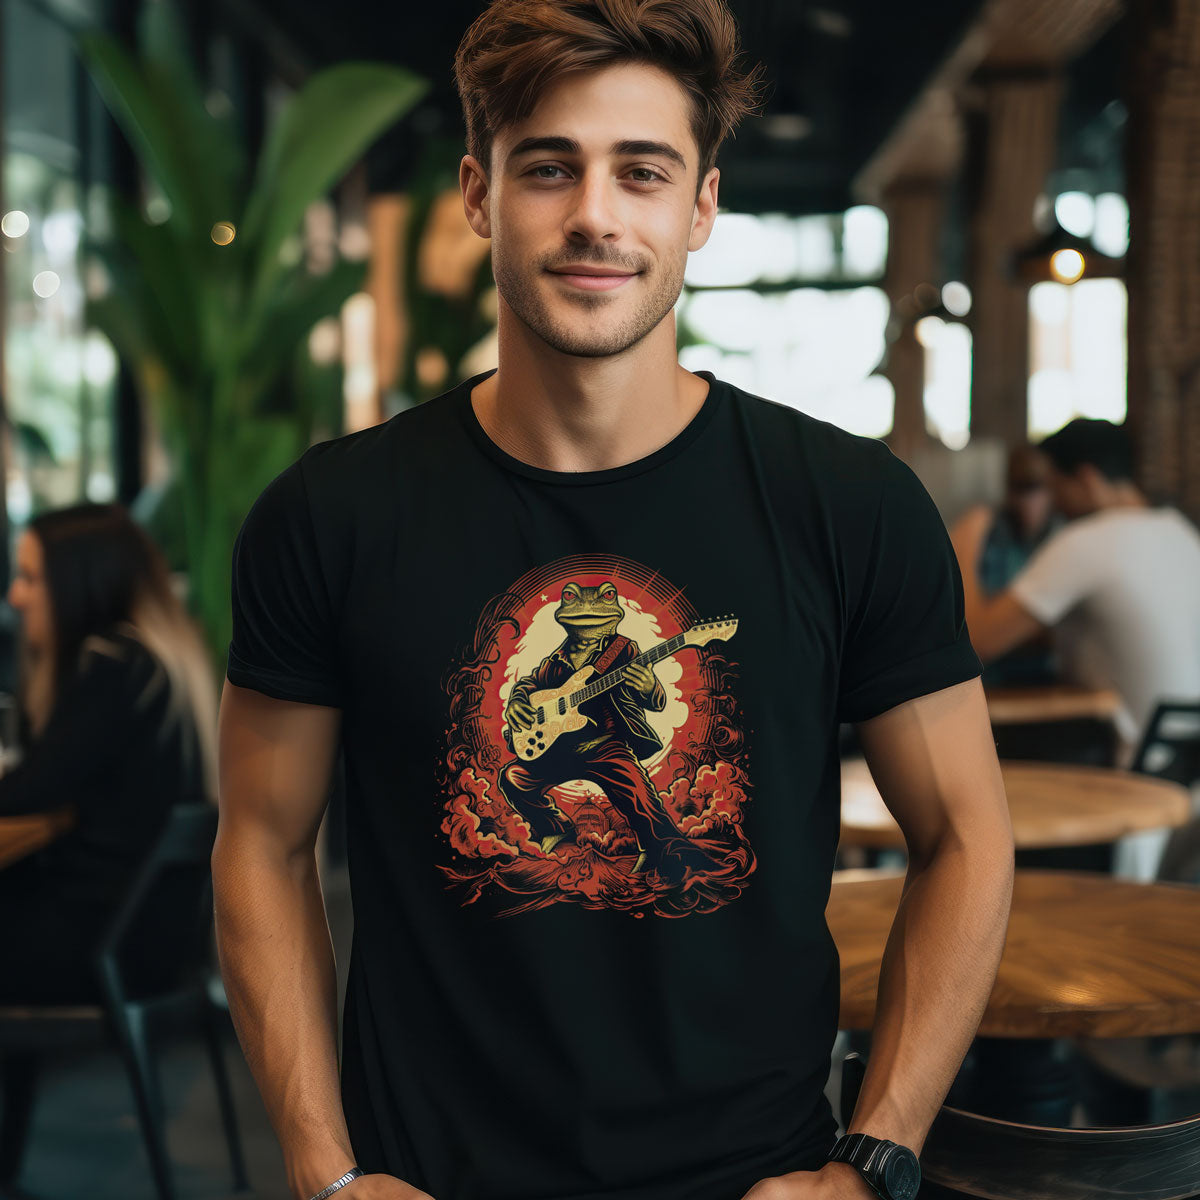 guy in a cafe wearing a black t-shirt with a frog playing the guitar print